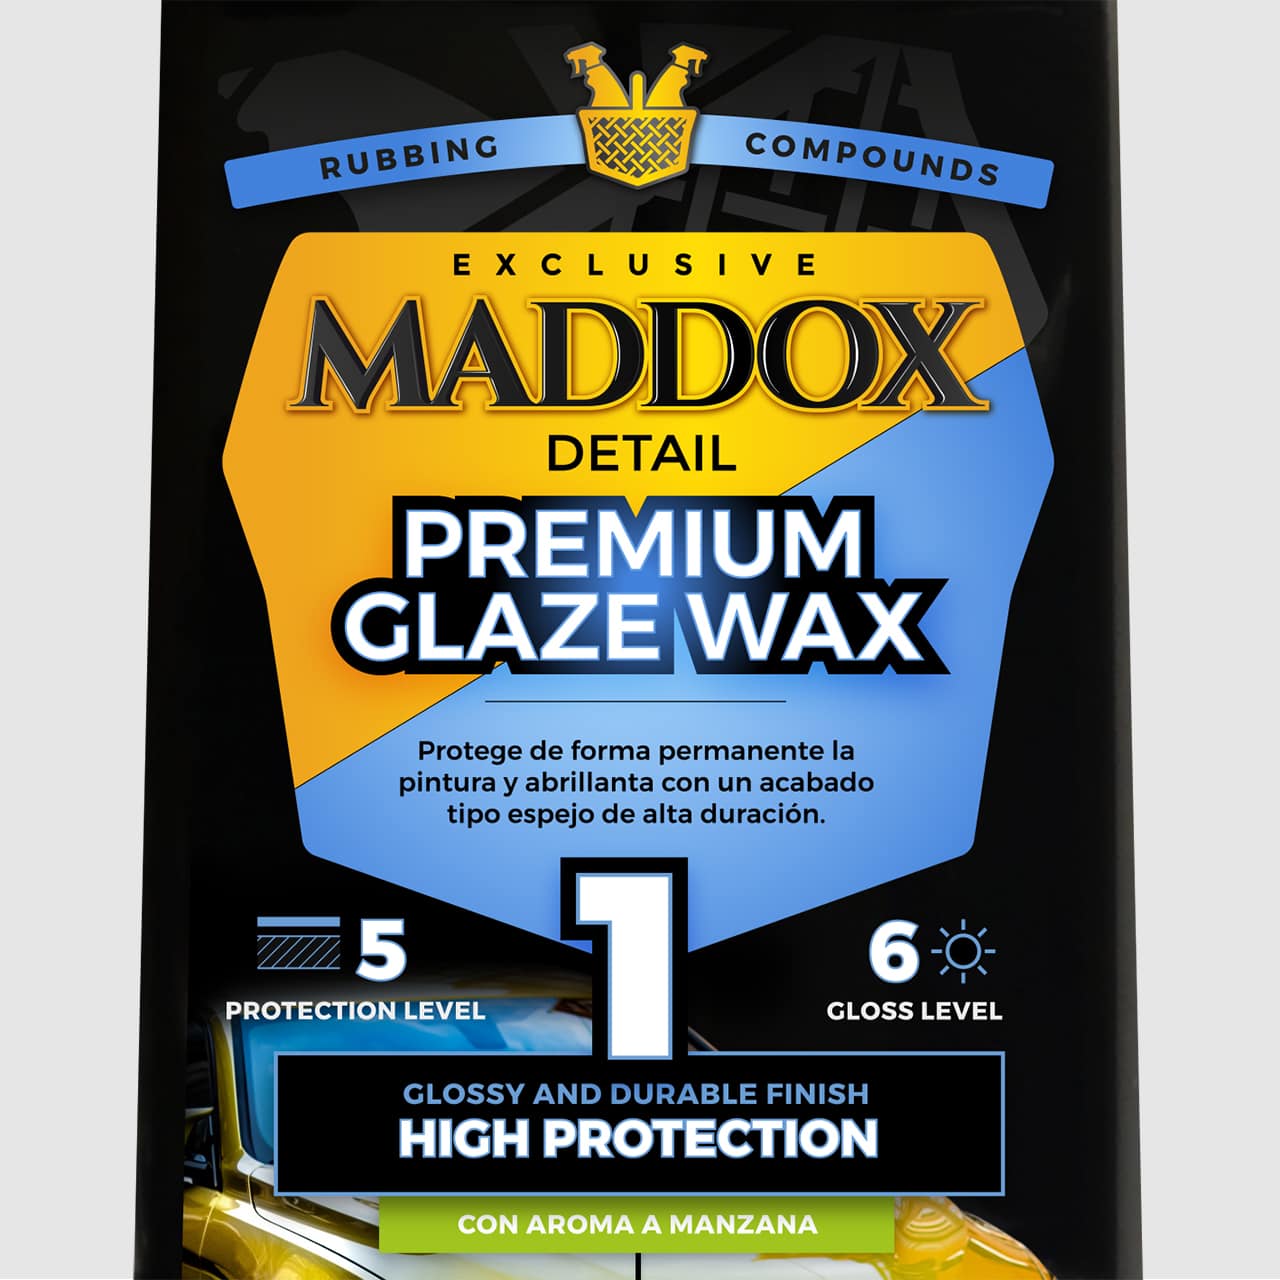 Maddox Detail lanza Ceramic Protection e Hydrophobic Protection